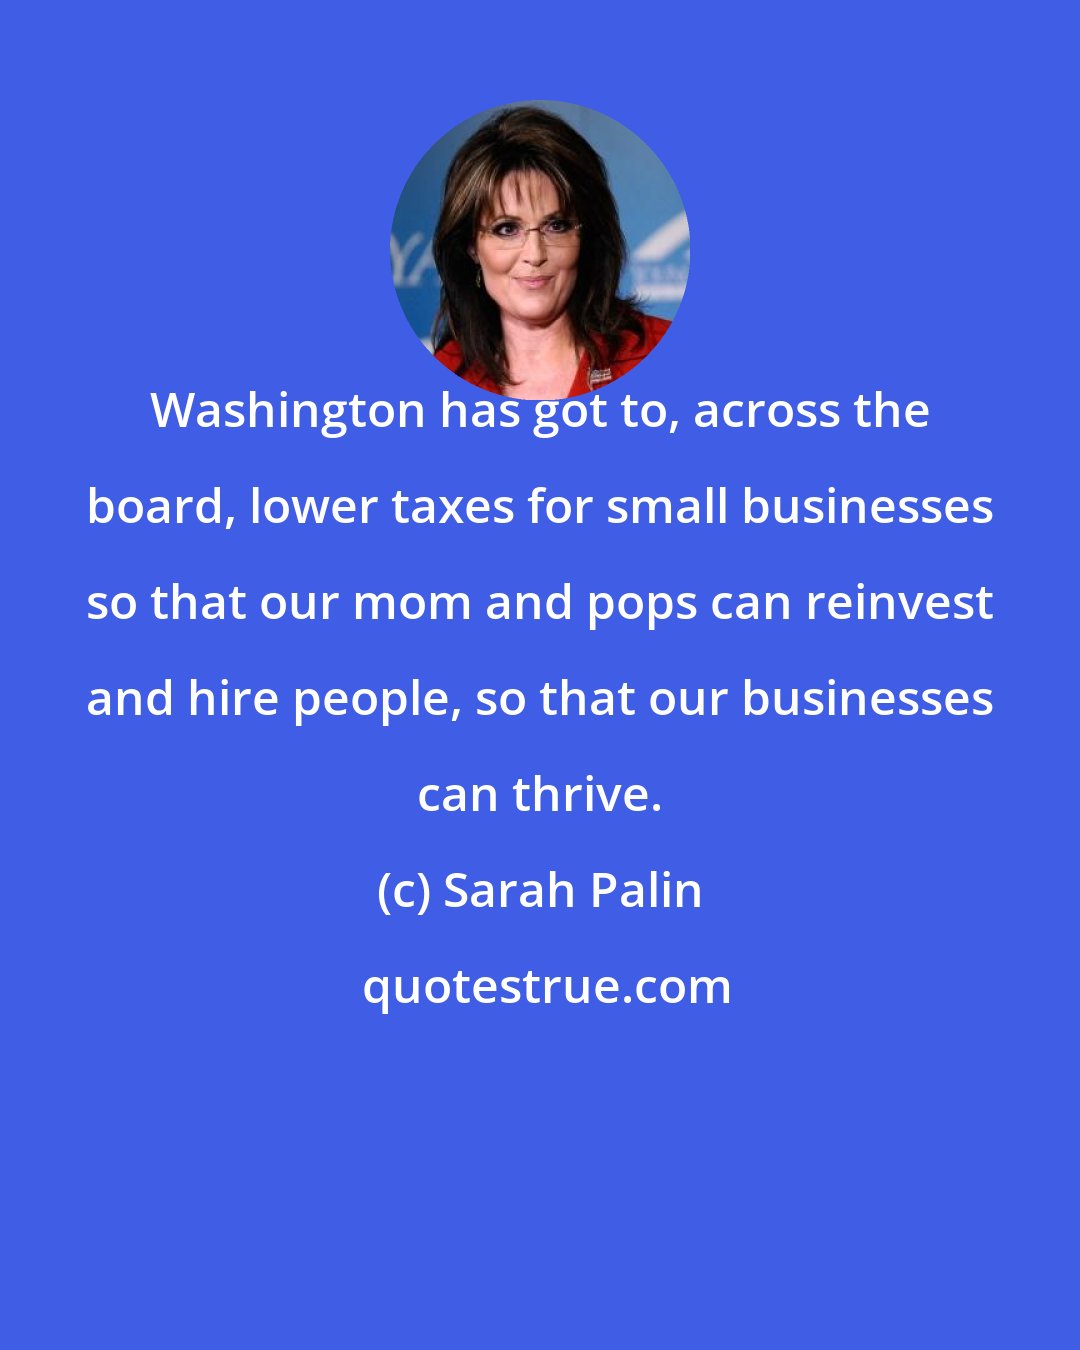 Sarah Palin: Washington has got to, across the board, lower taxes for small businesses so that our mom and pops can reinvest and hire people, so that our businesses can thrive.